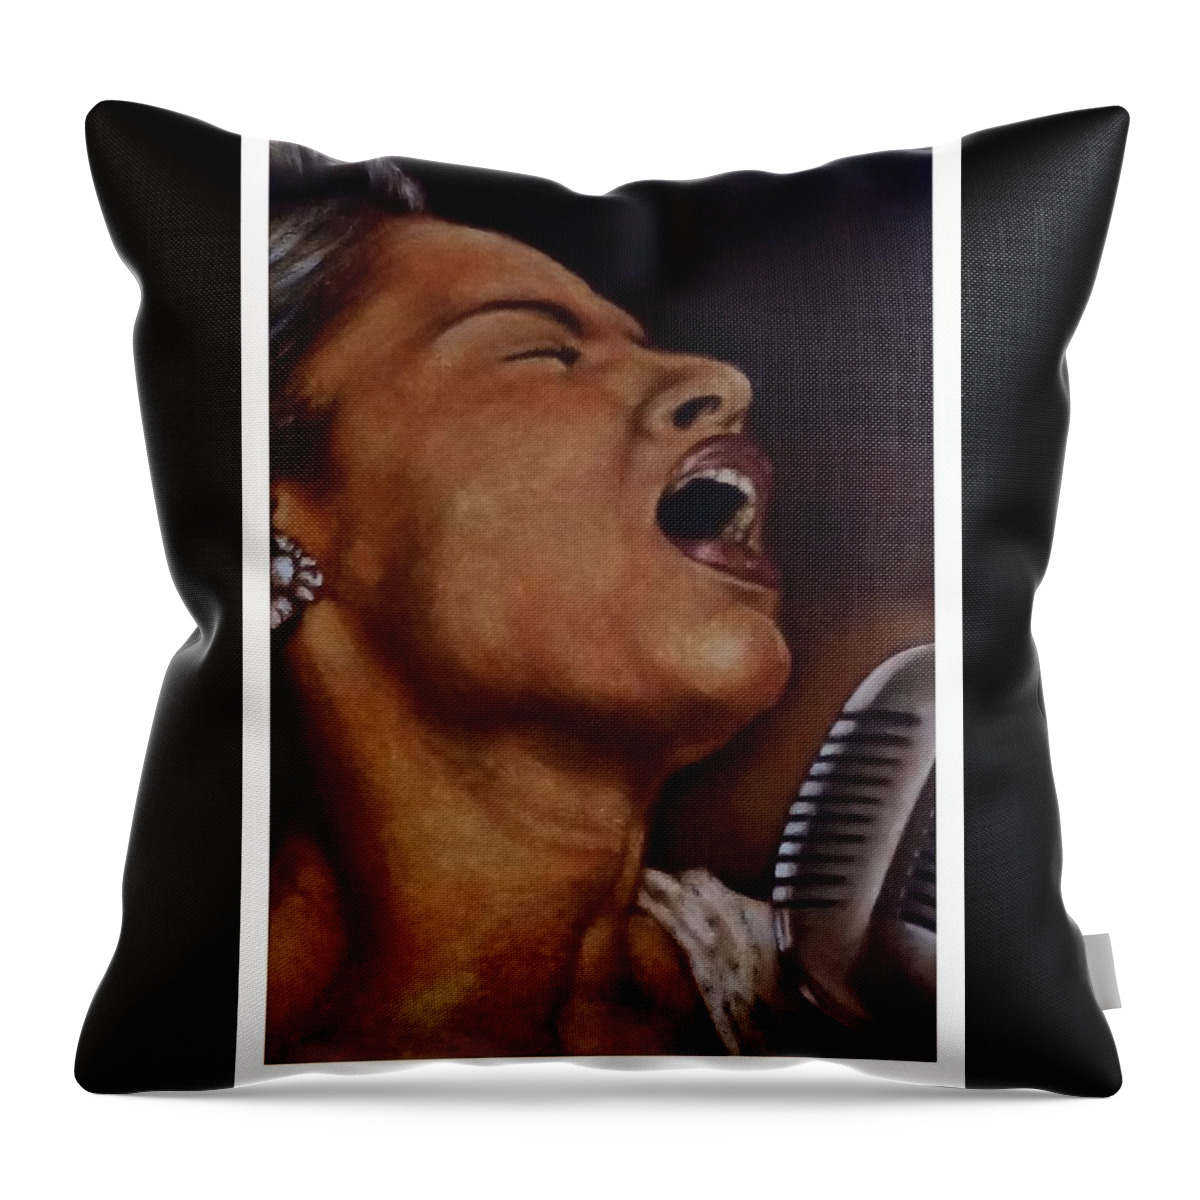 Lady Throw Pillow featuring the painting Lady Sings by Melanie T